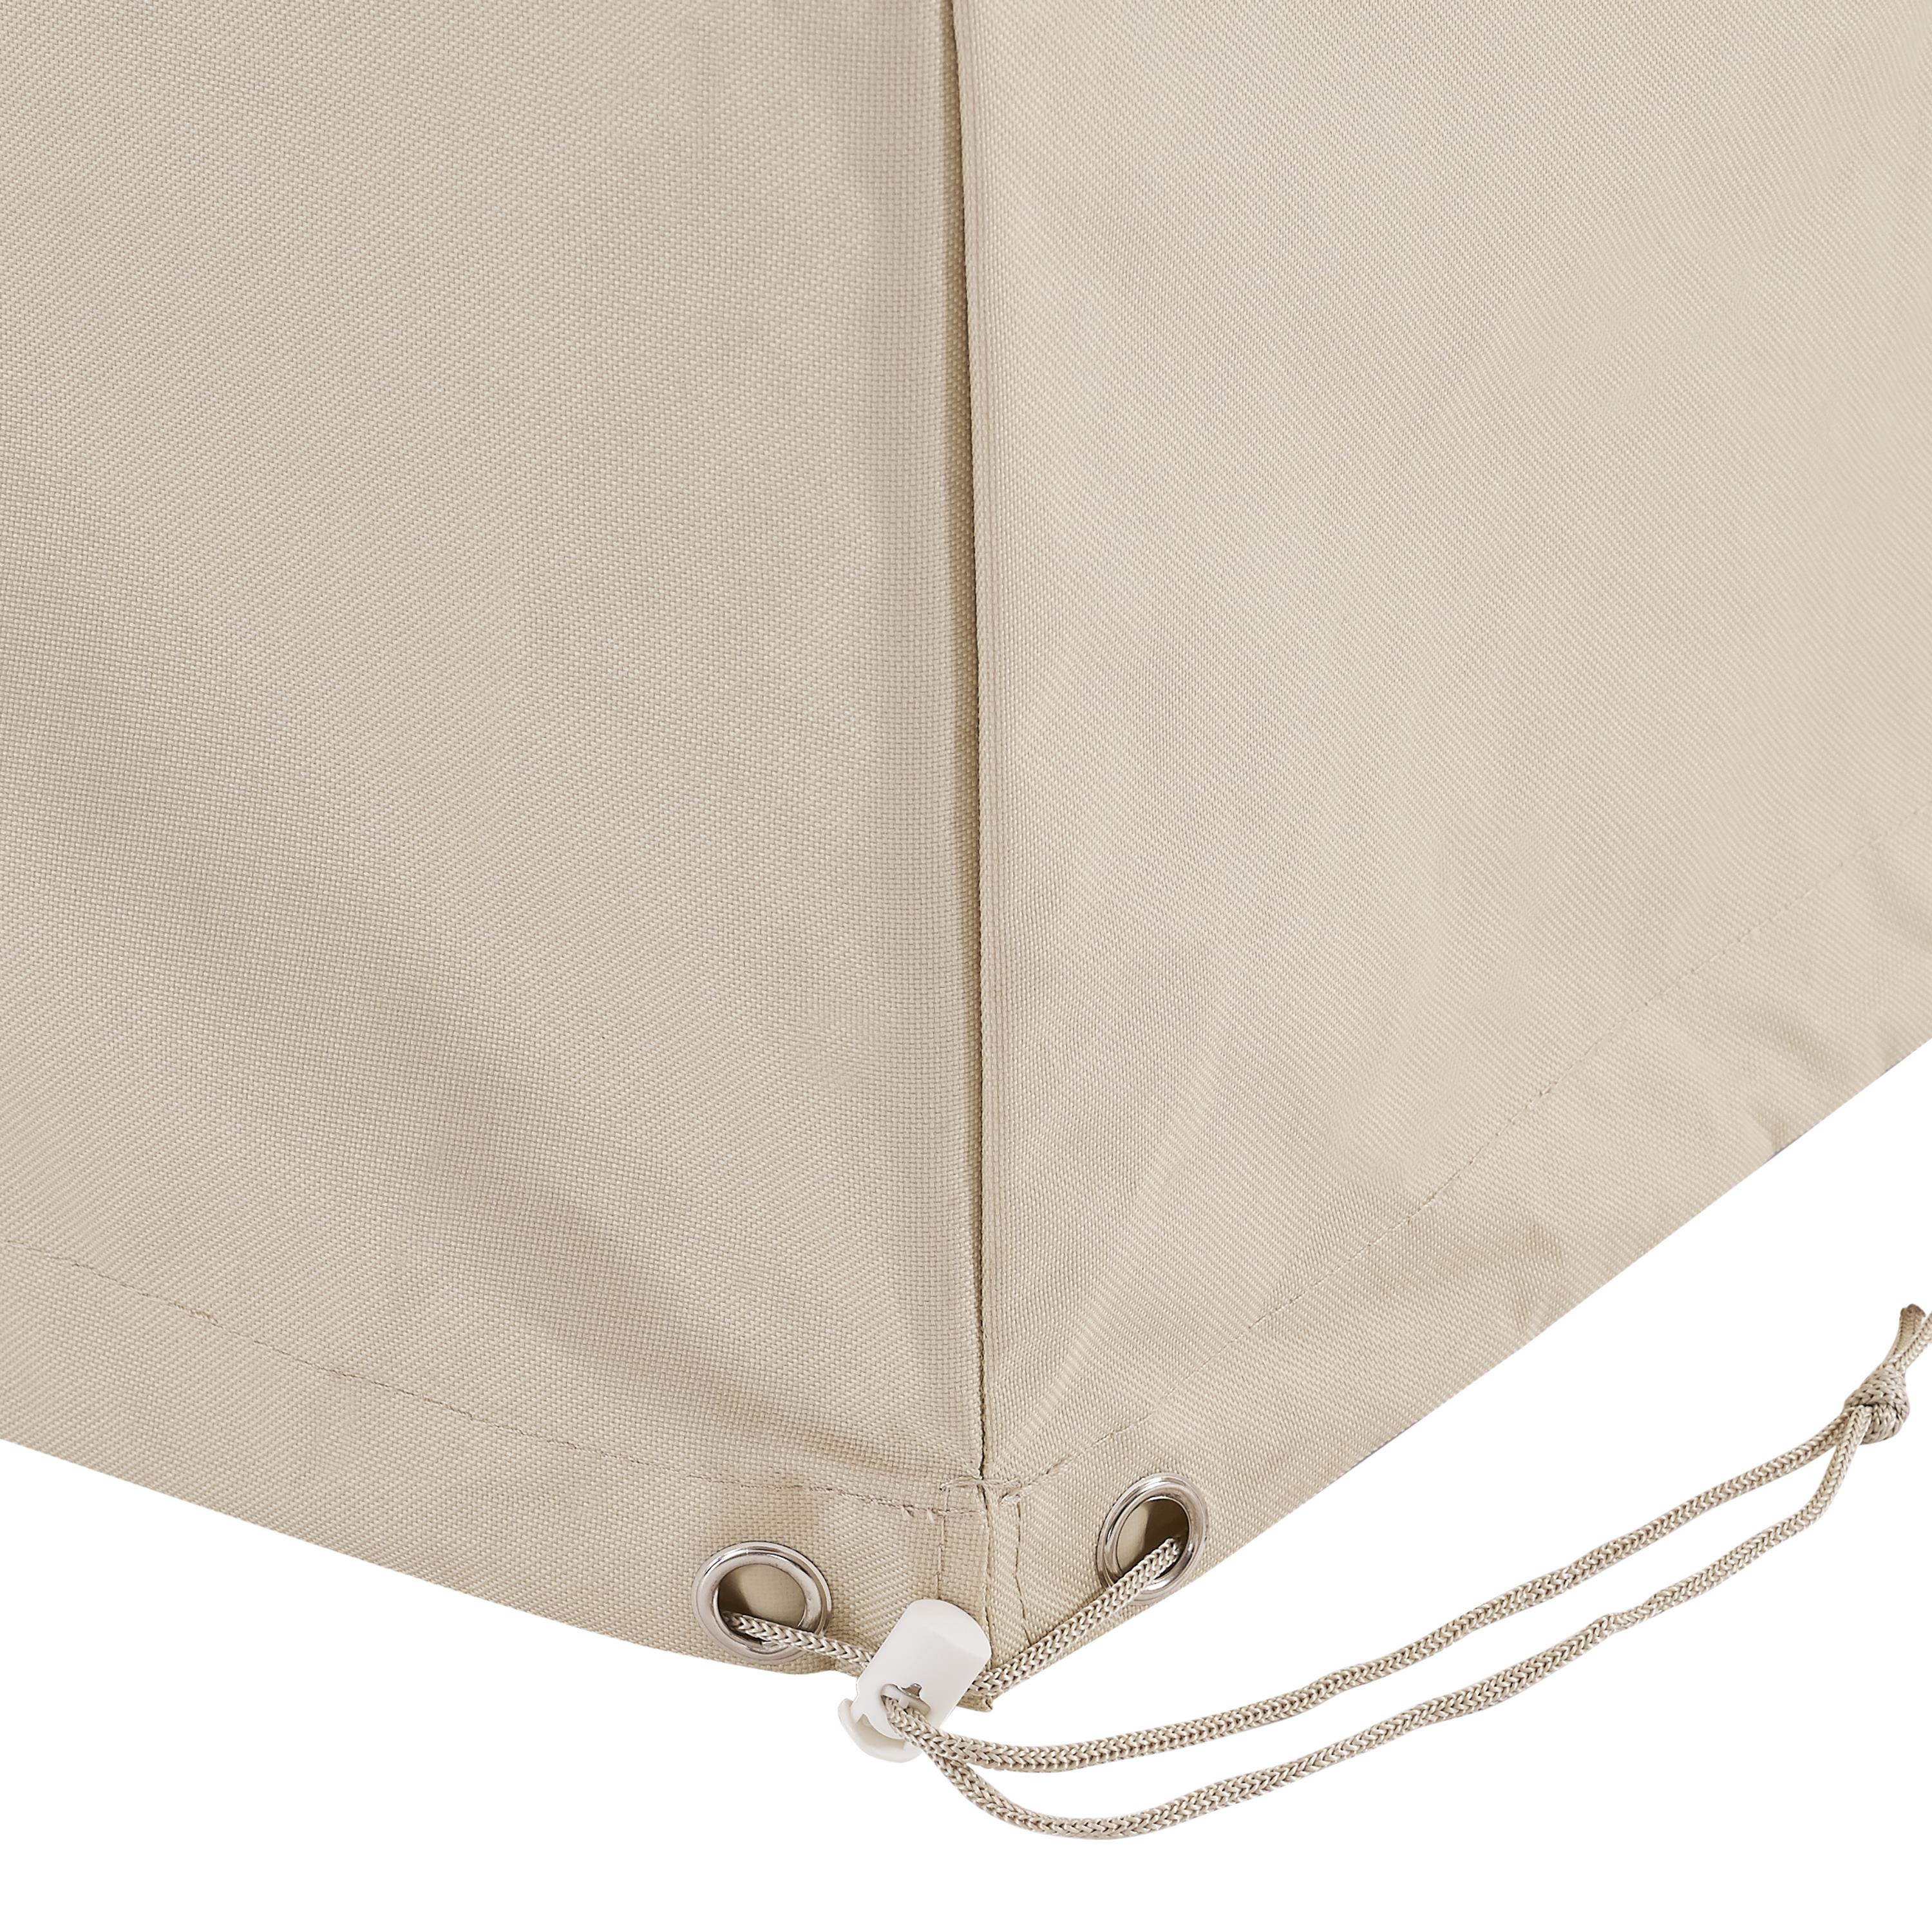 Crosley Furniture Outdoor Vinyl Chair Cover in Tan (Set of 2) - image 5 of 8